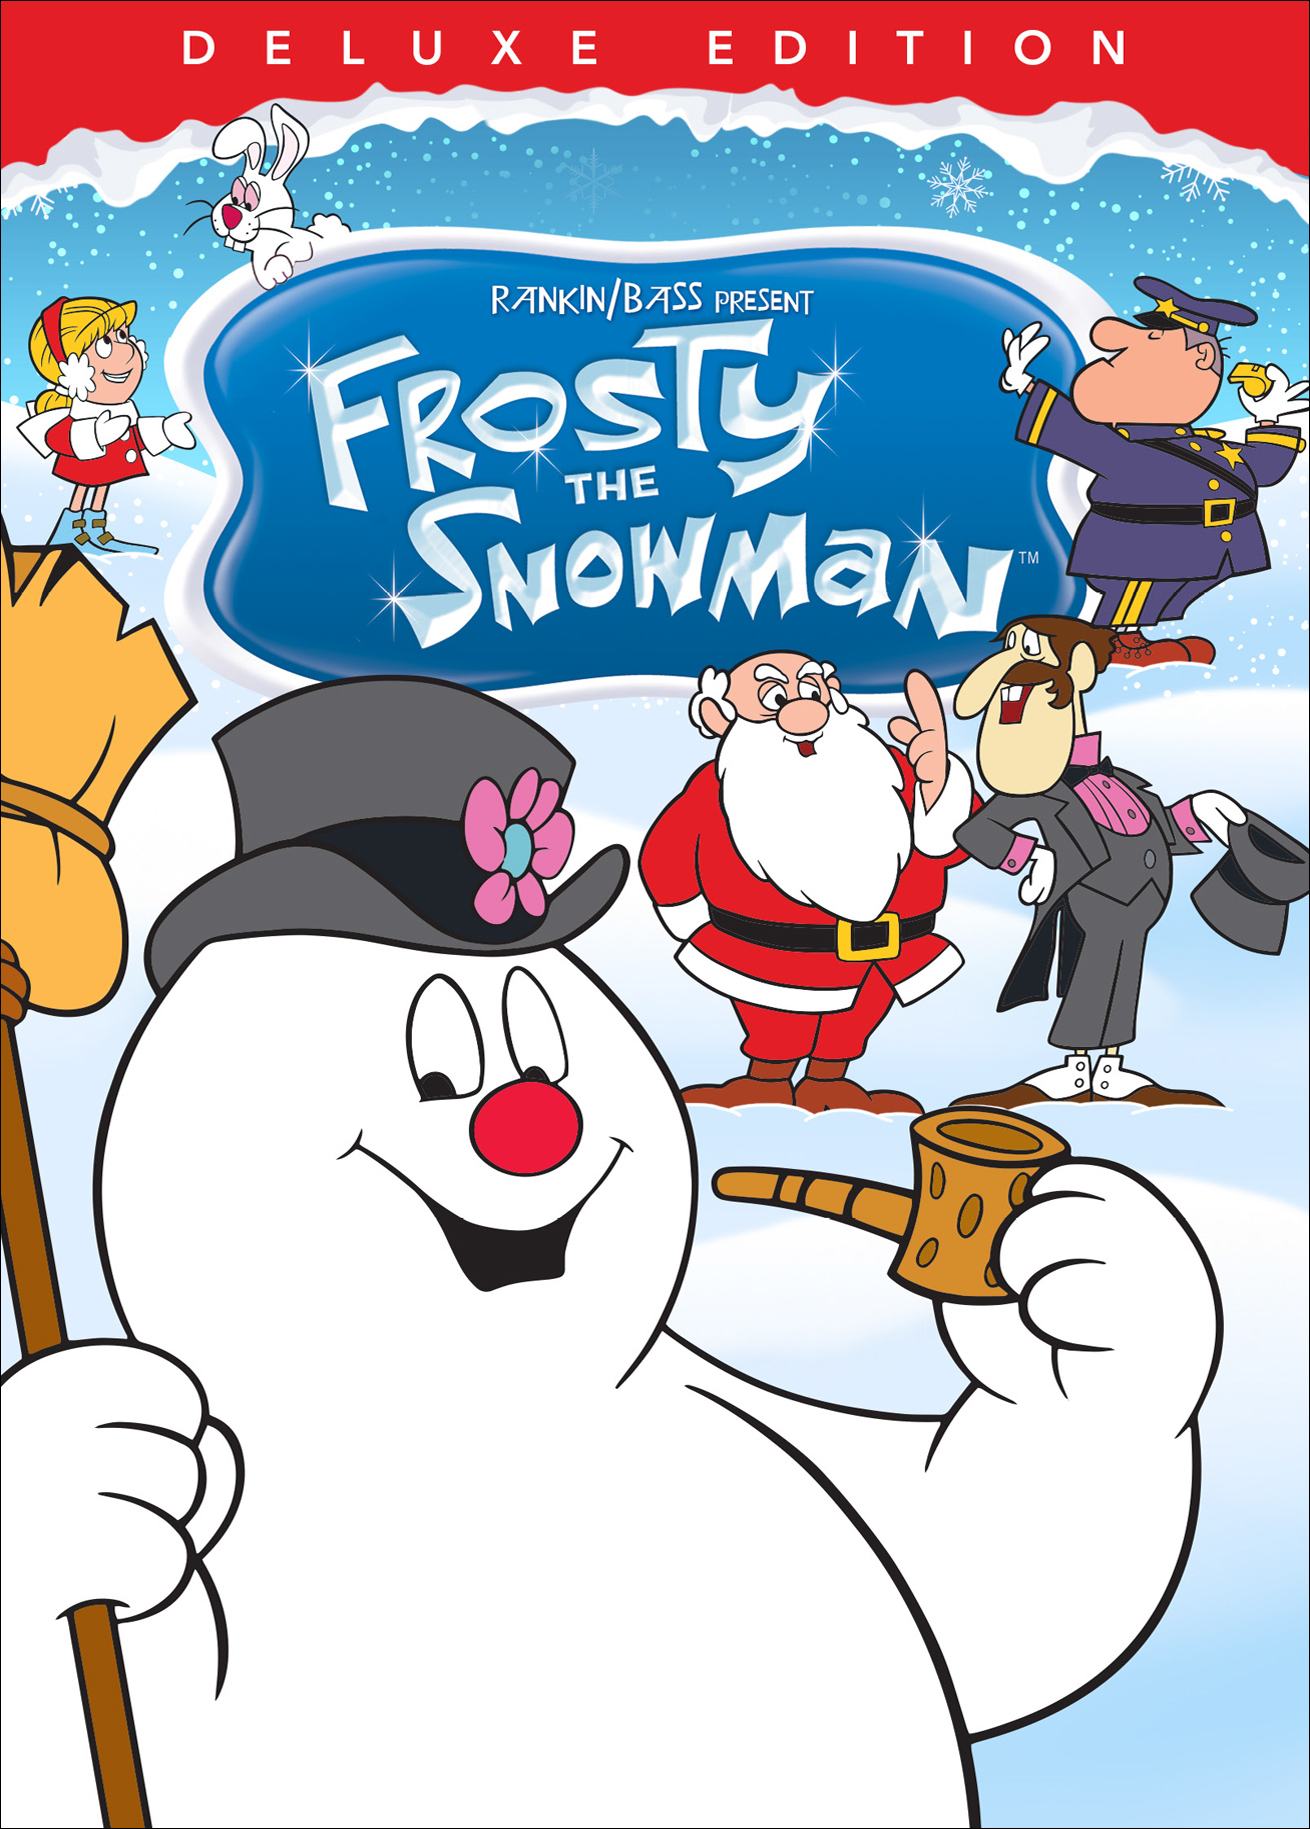 Frosty the Snowman [Deluxe Edition] [DVD] [1969] - Best Buy